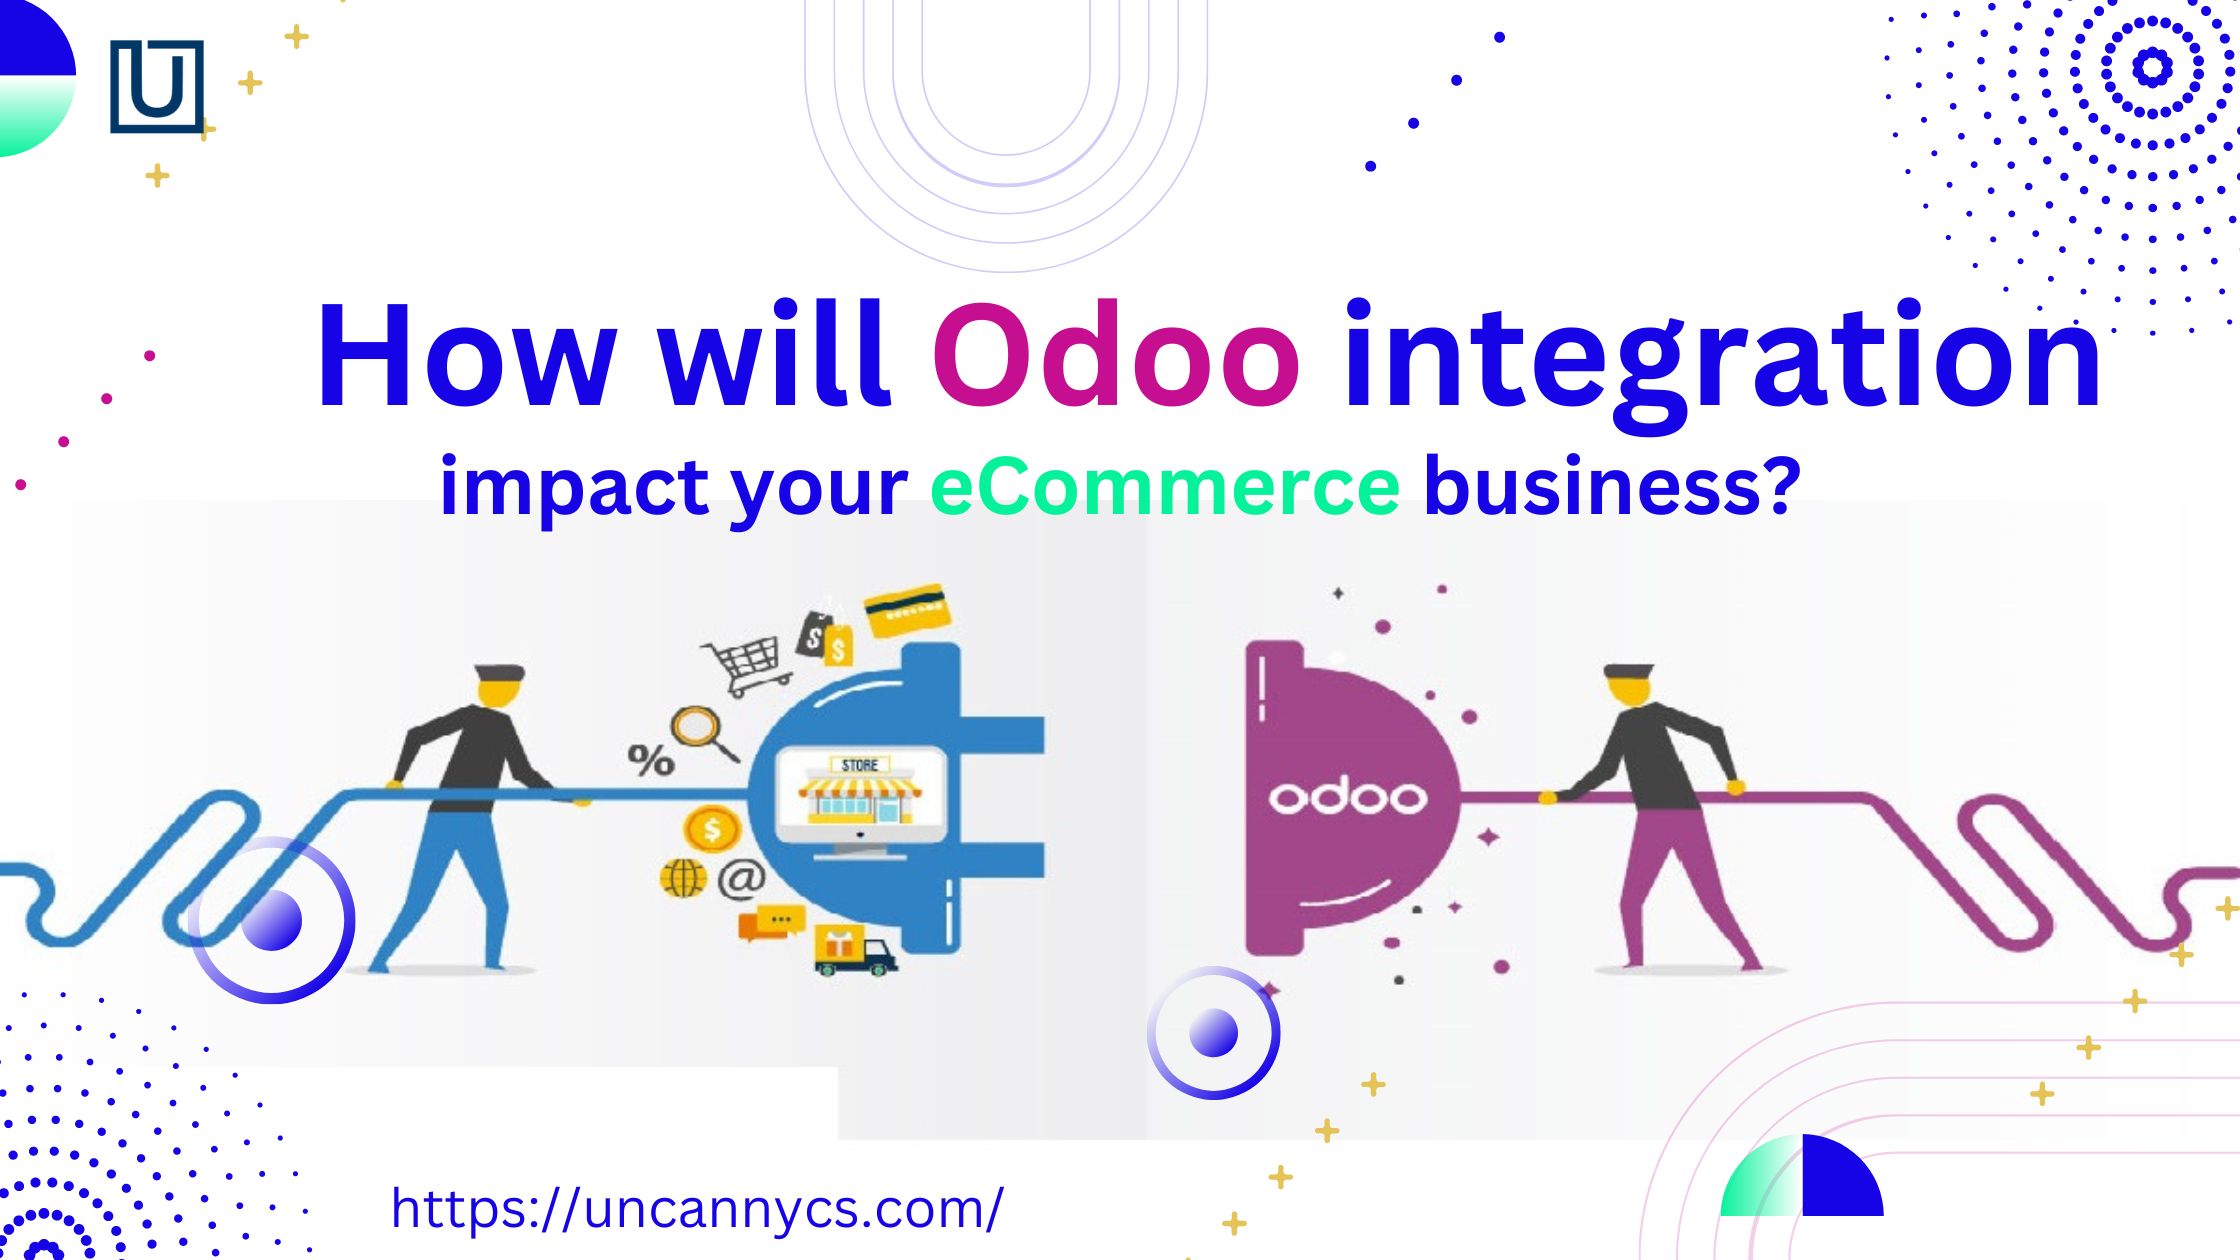 How will Odoo integration impact your eCommerce business?